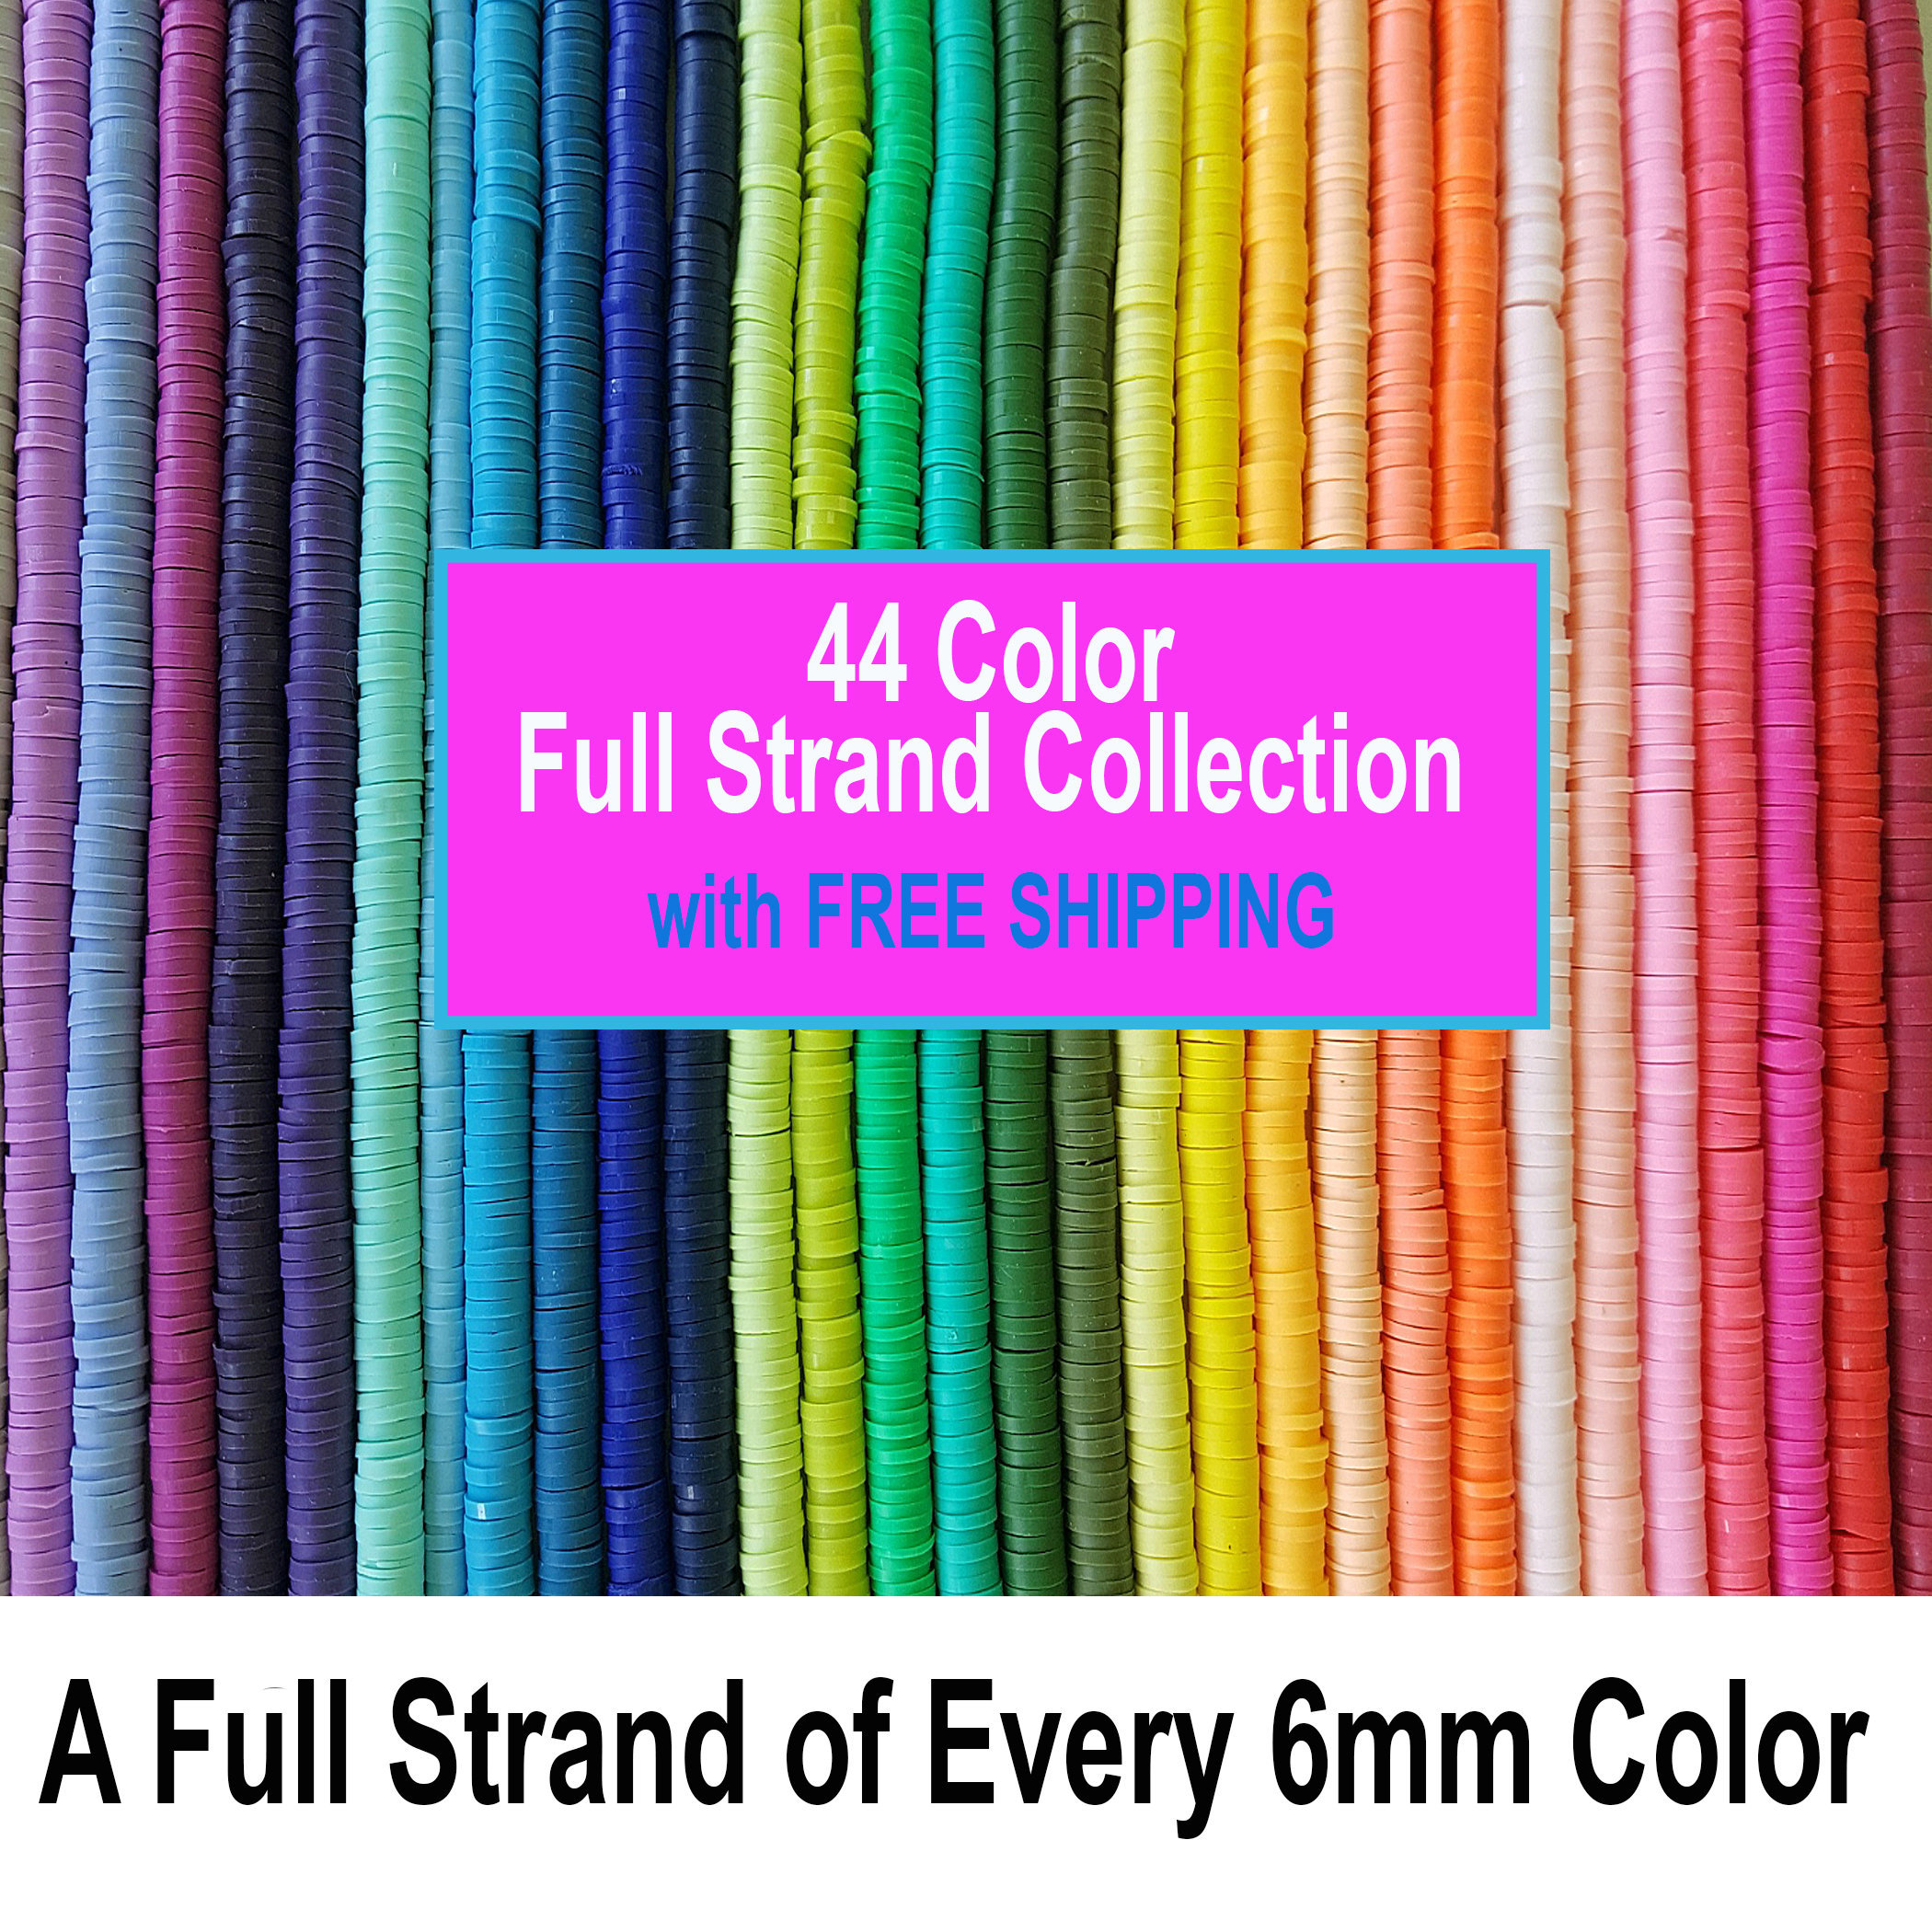 15000Pcs 144 Colors Clay Beads Charm Bracelet Making Kit for Girls 8-12  Polymer